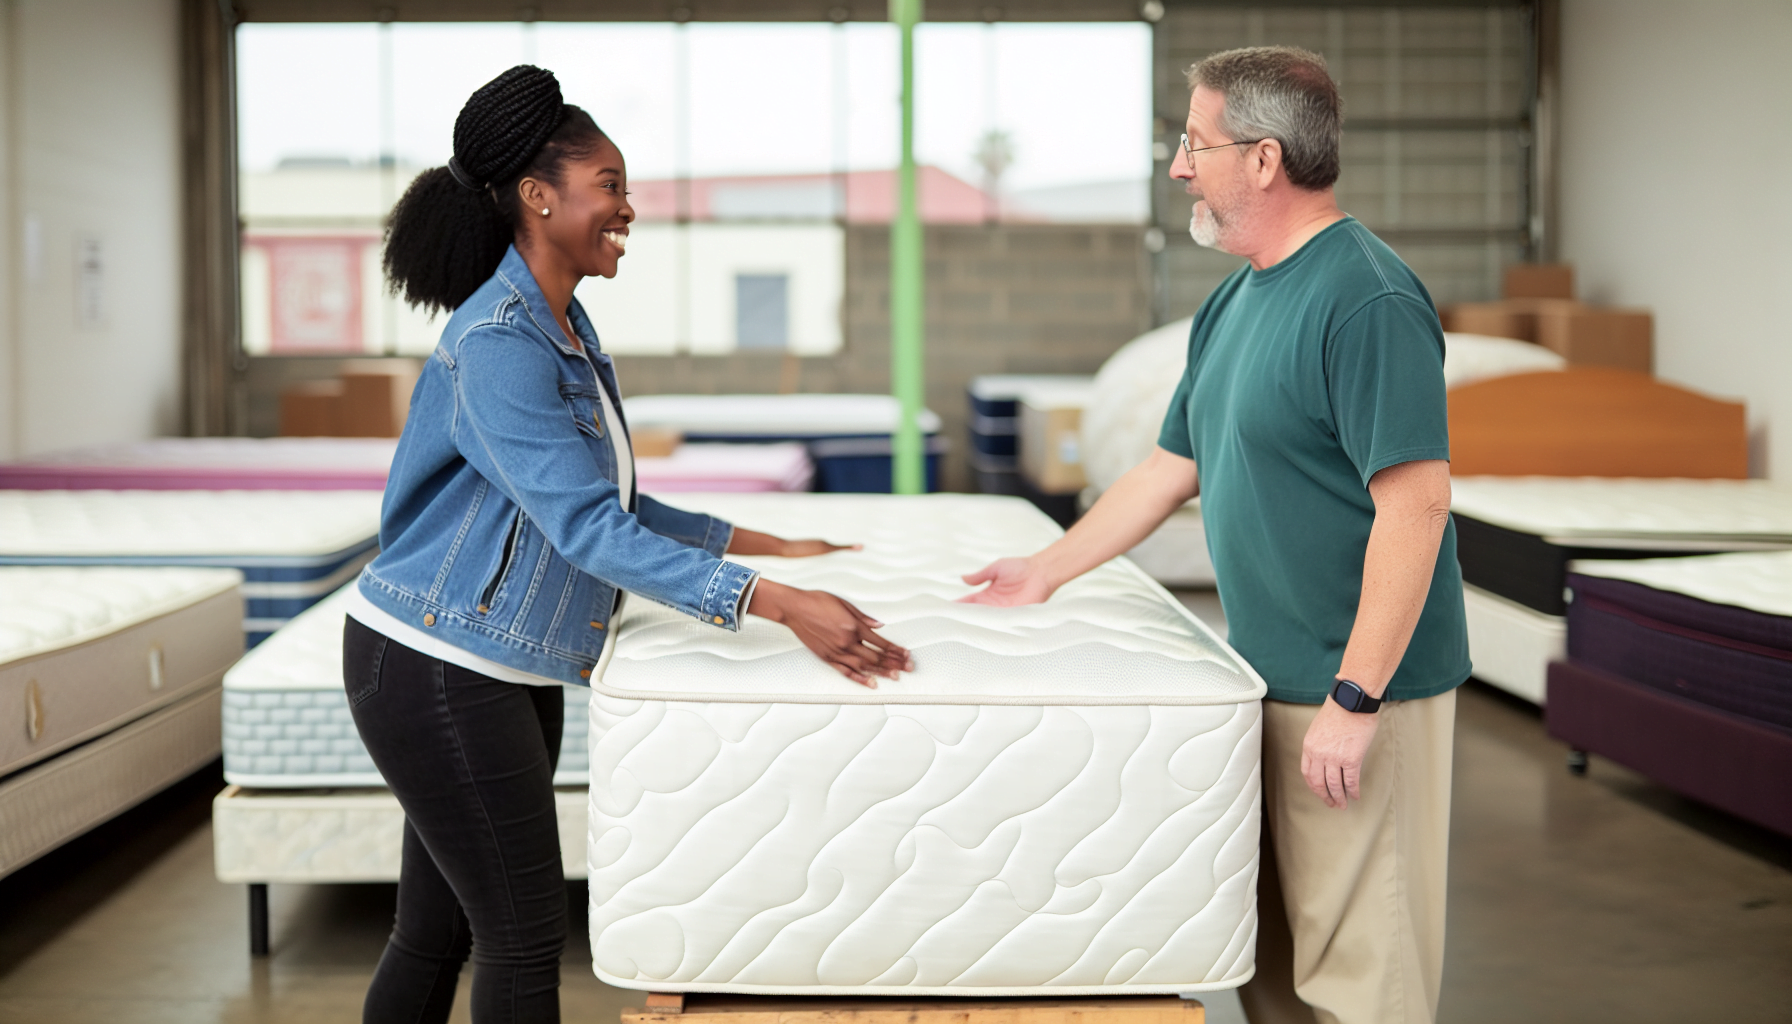 Donating gently used mattress to charity